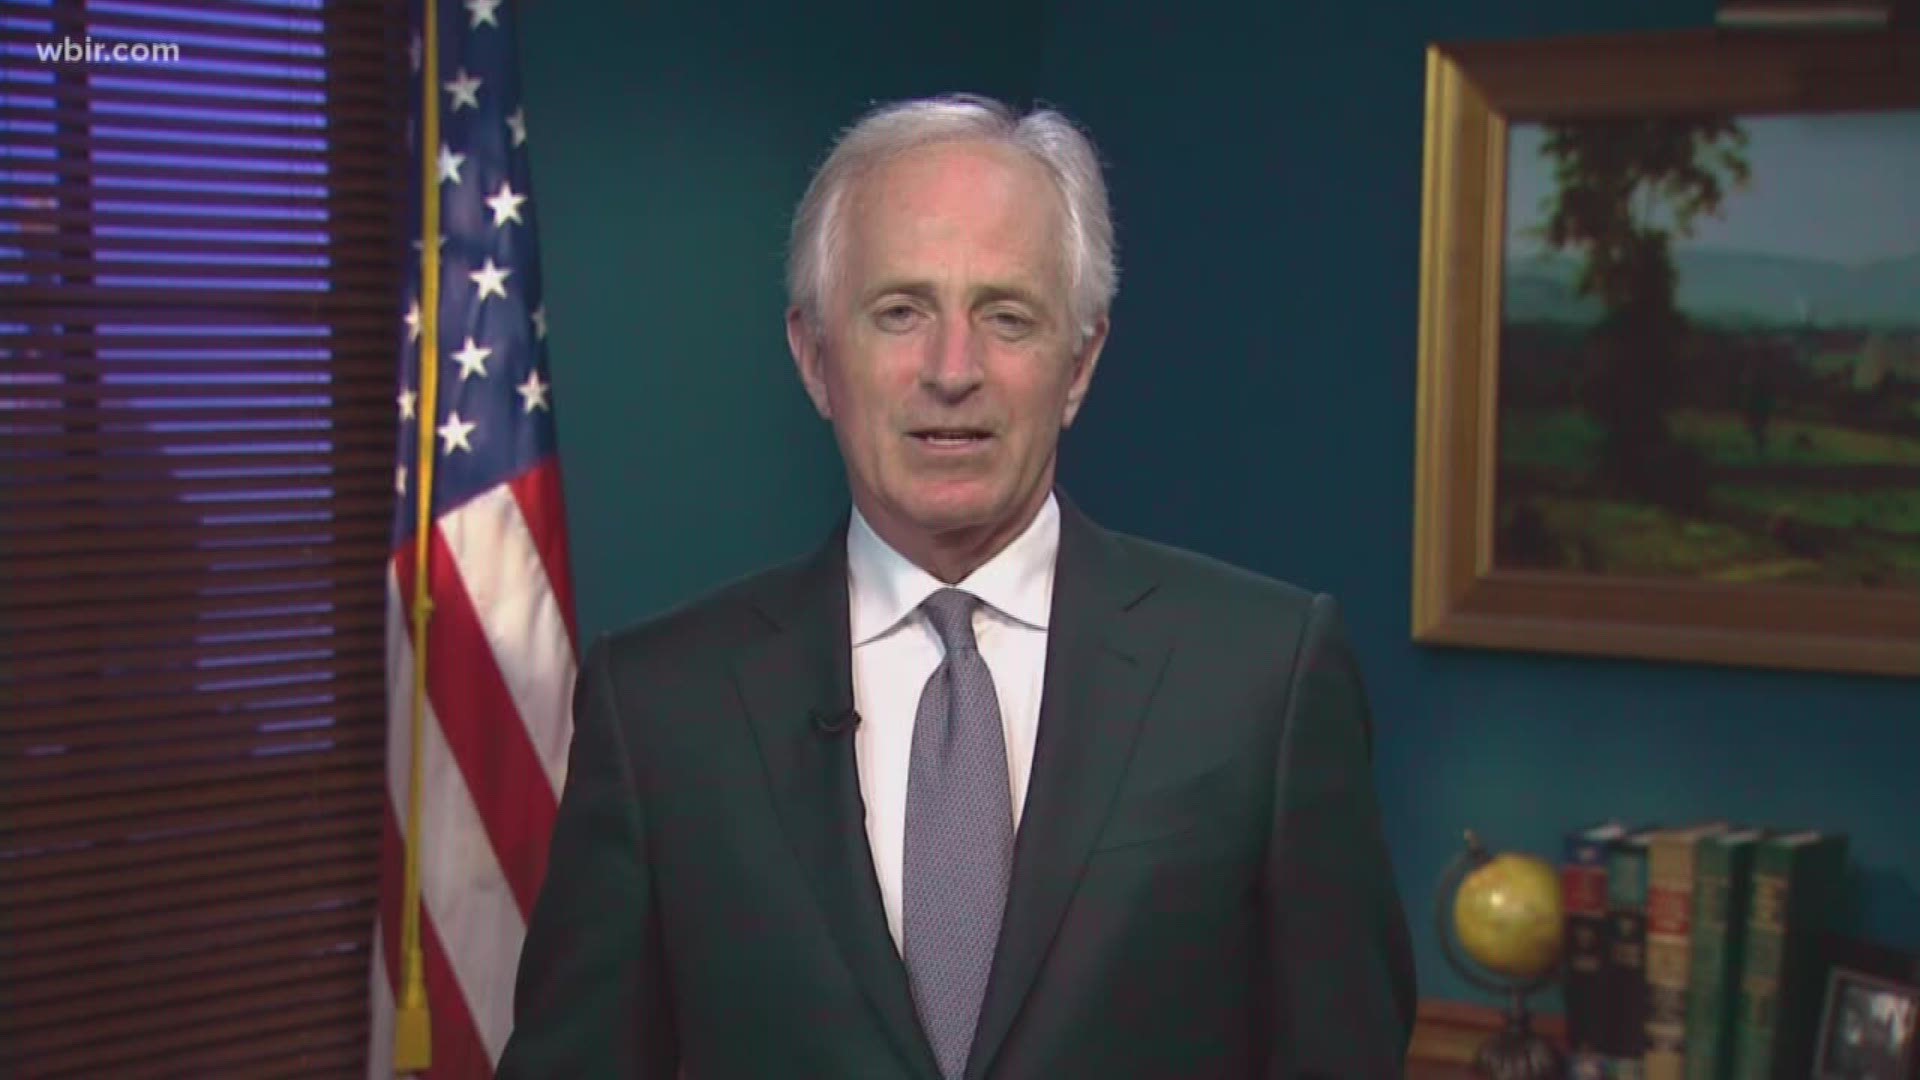 Oct. 25, 2017: Sen. Bob Corker reacted to a string of critical tweets by President Trump in part suggesting Corker couldn't win a race for dog catcher in Tennessee.